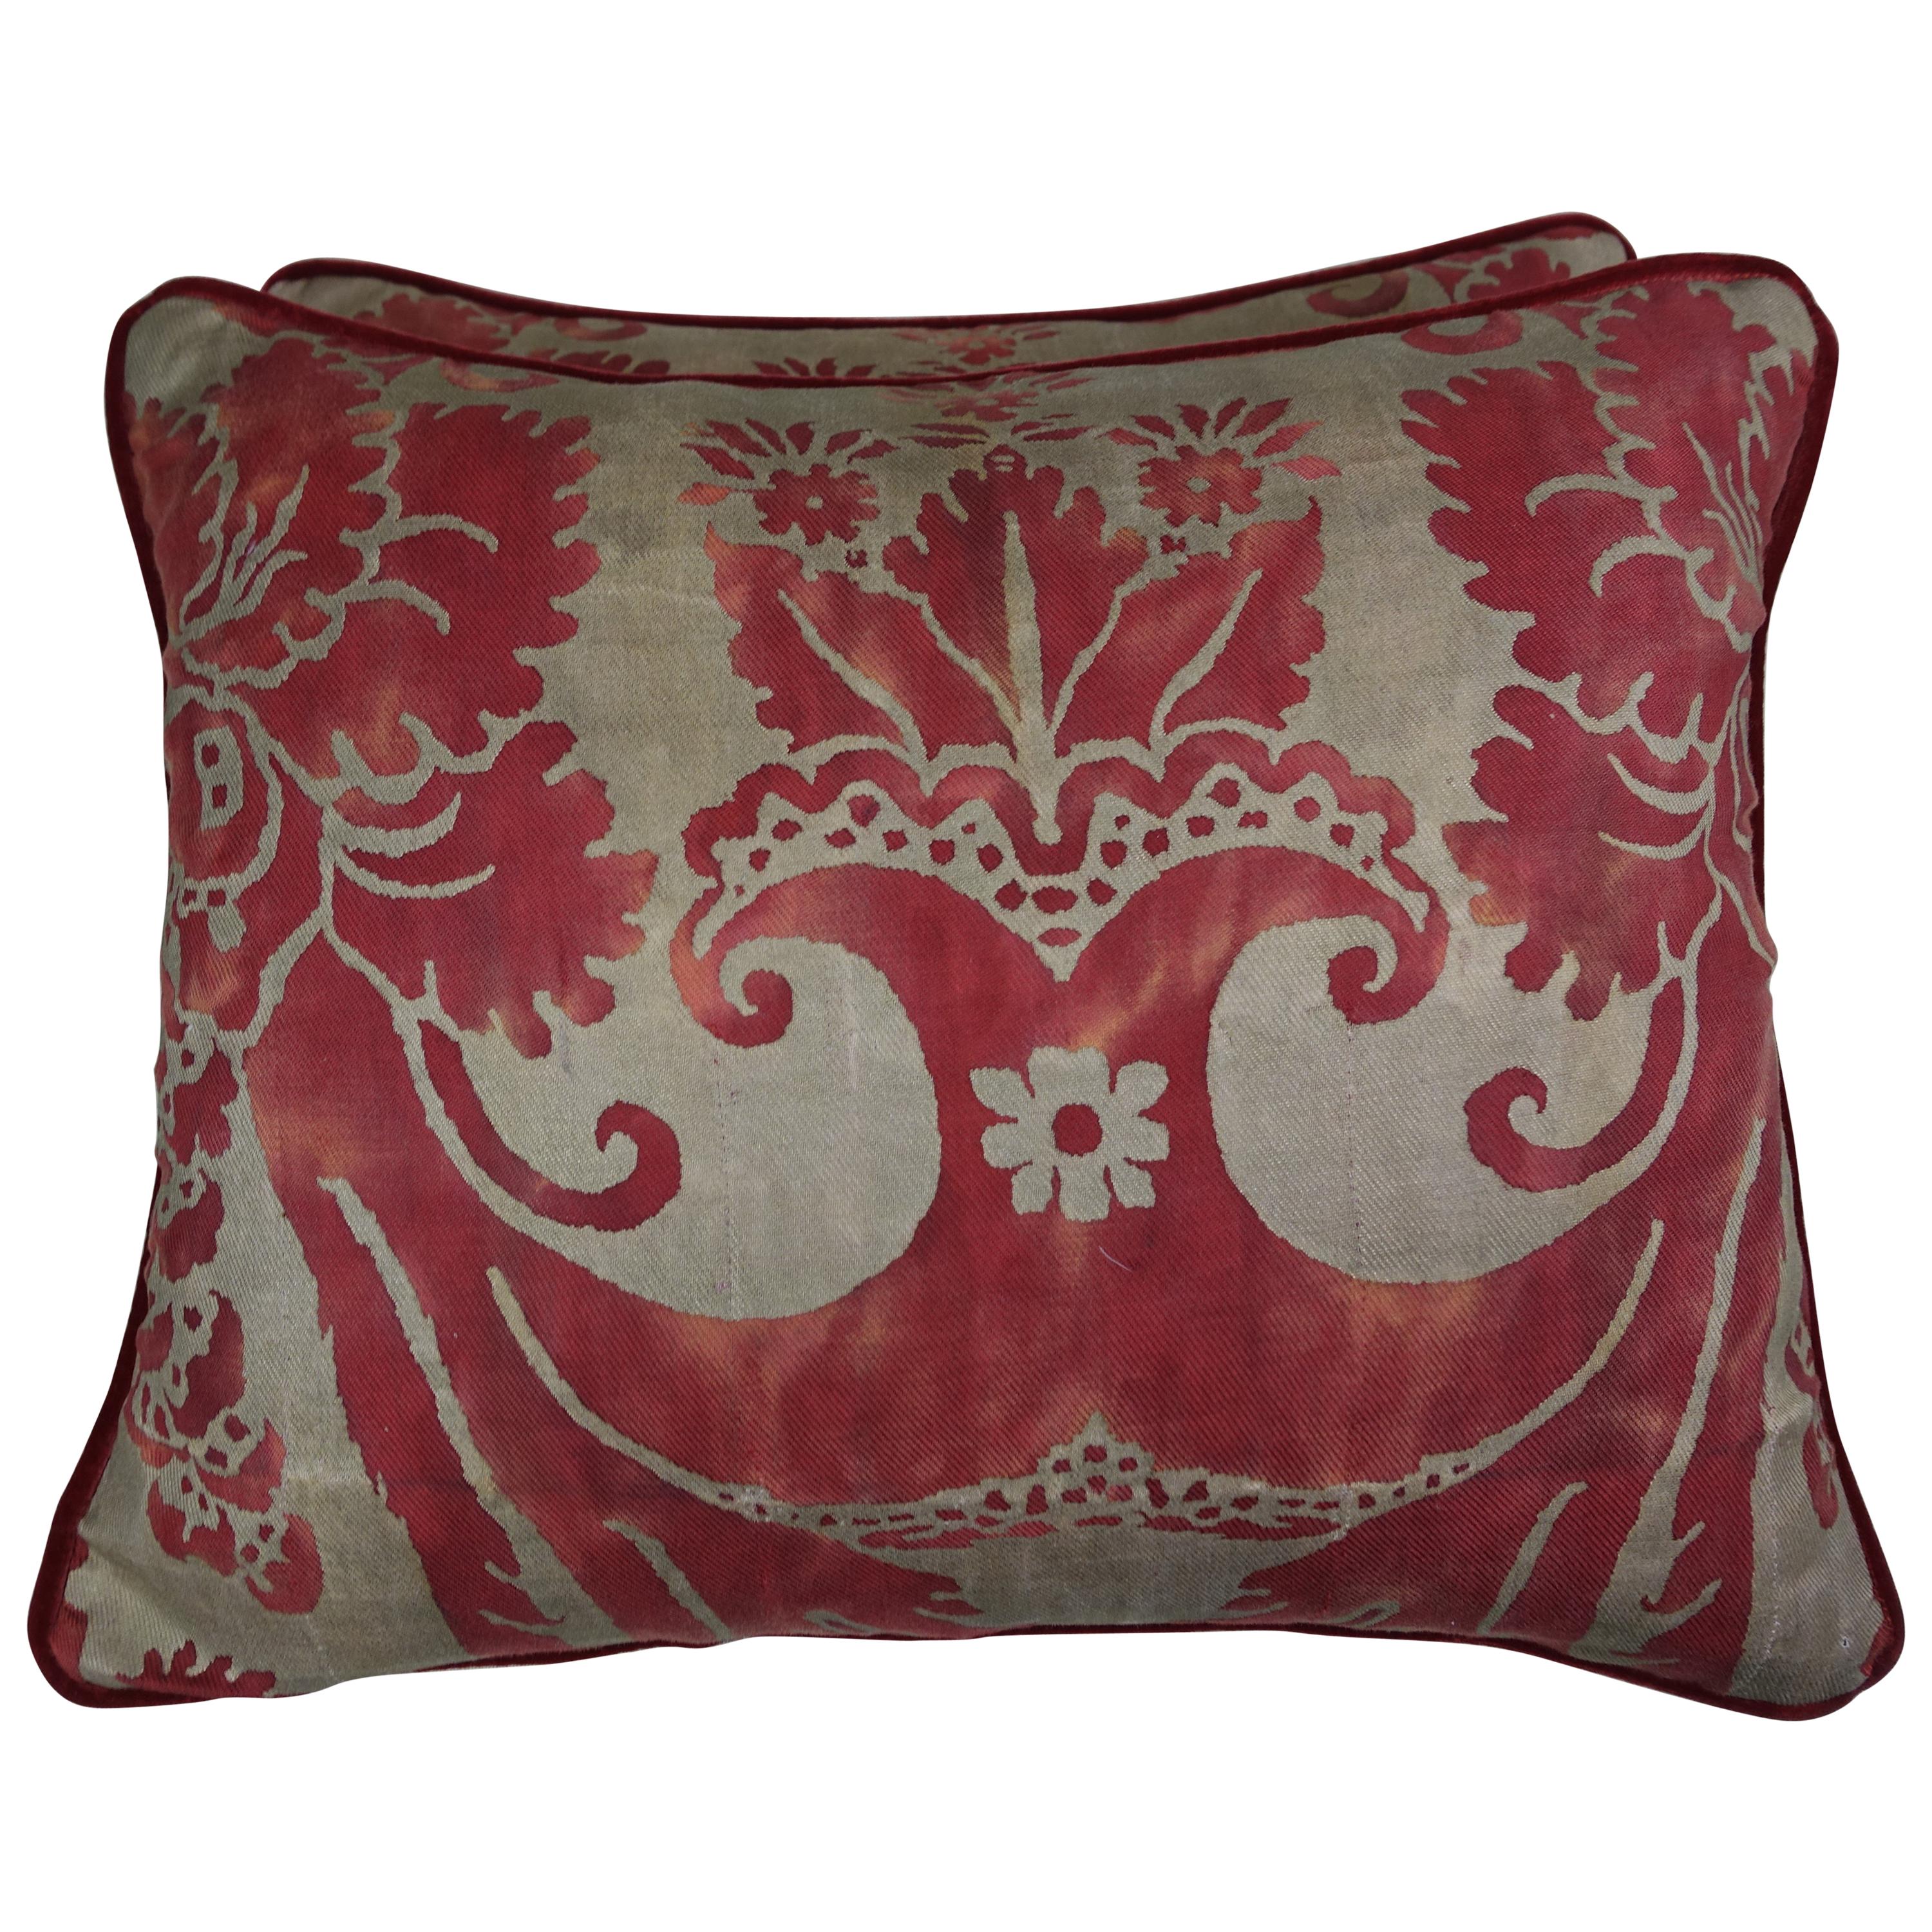 Vintage Glicine Patterned Fortuny Pillows, Pair